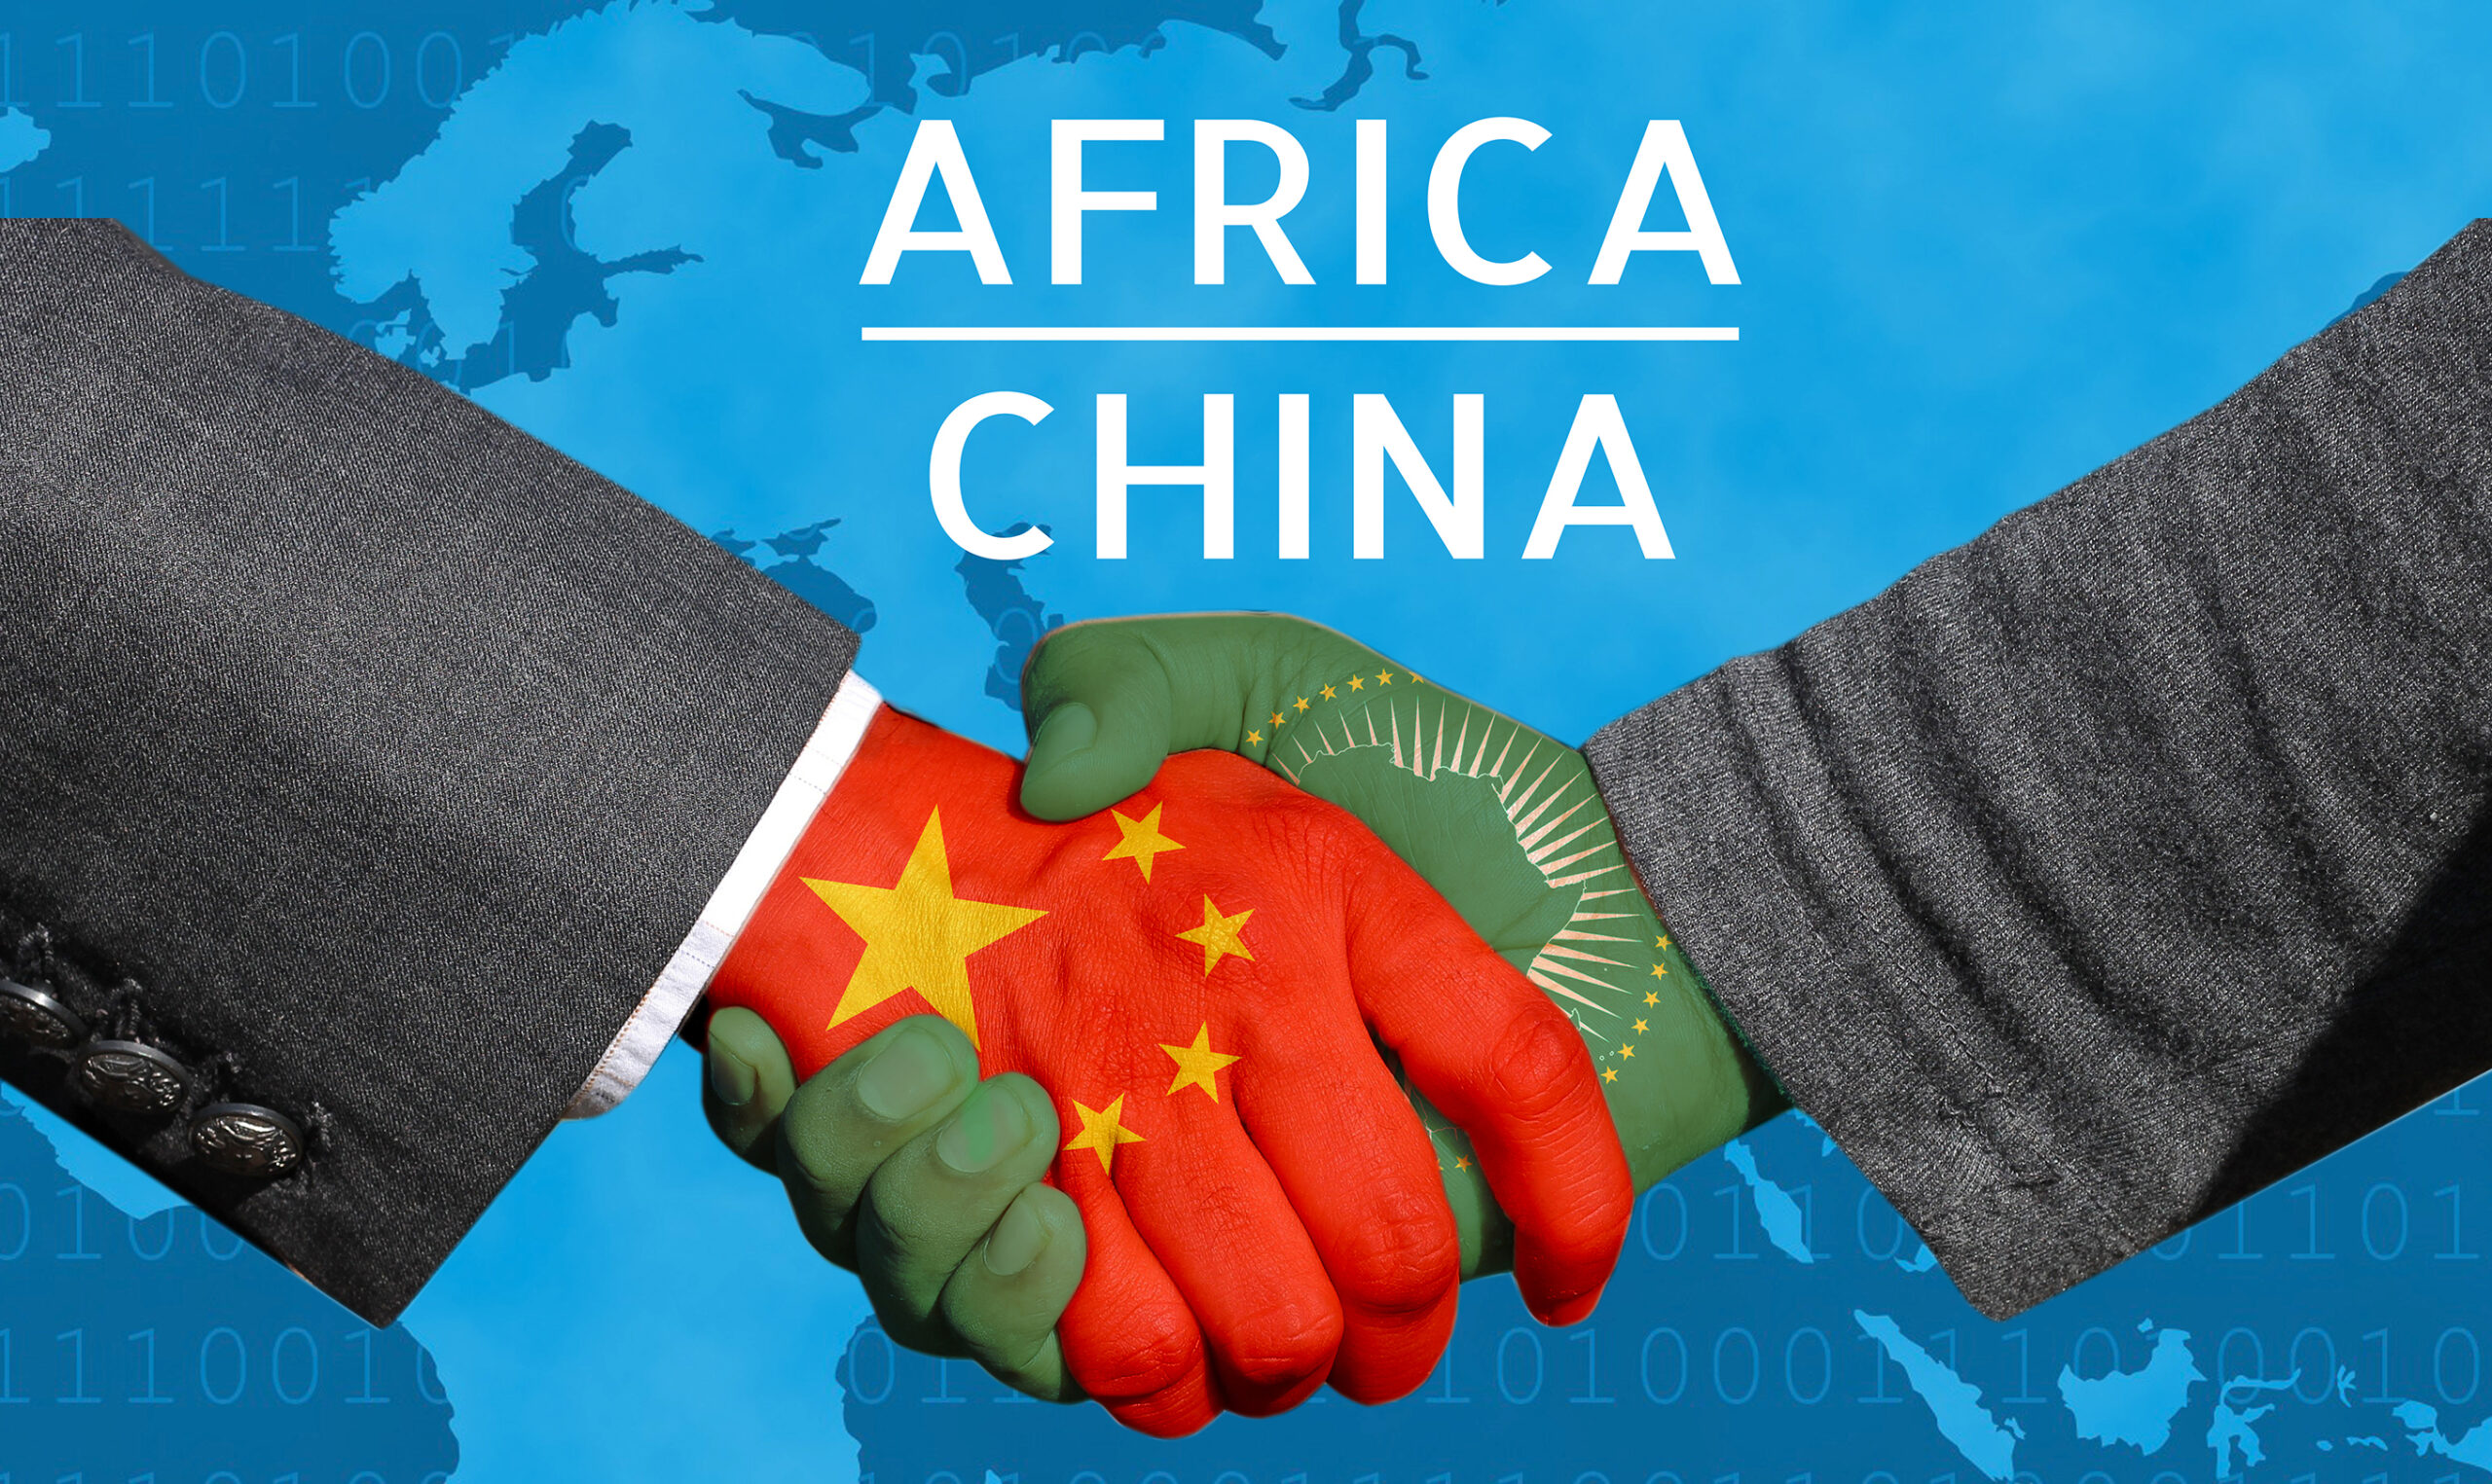 China Rejects Polisario s Participation In Africa Summit Medafrica Times